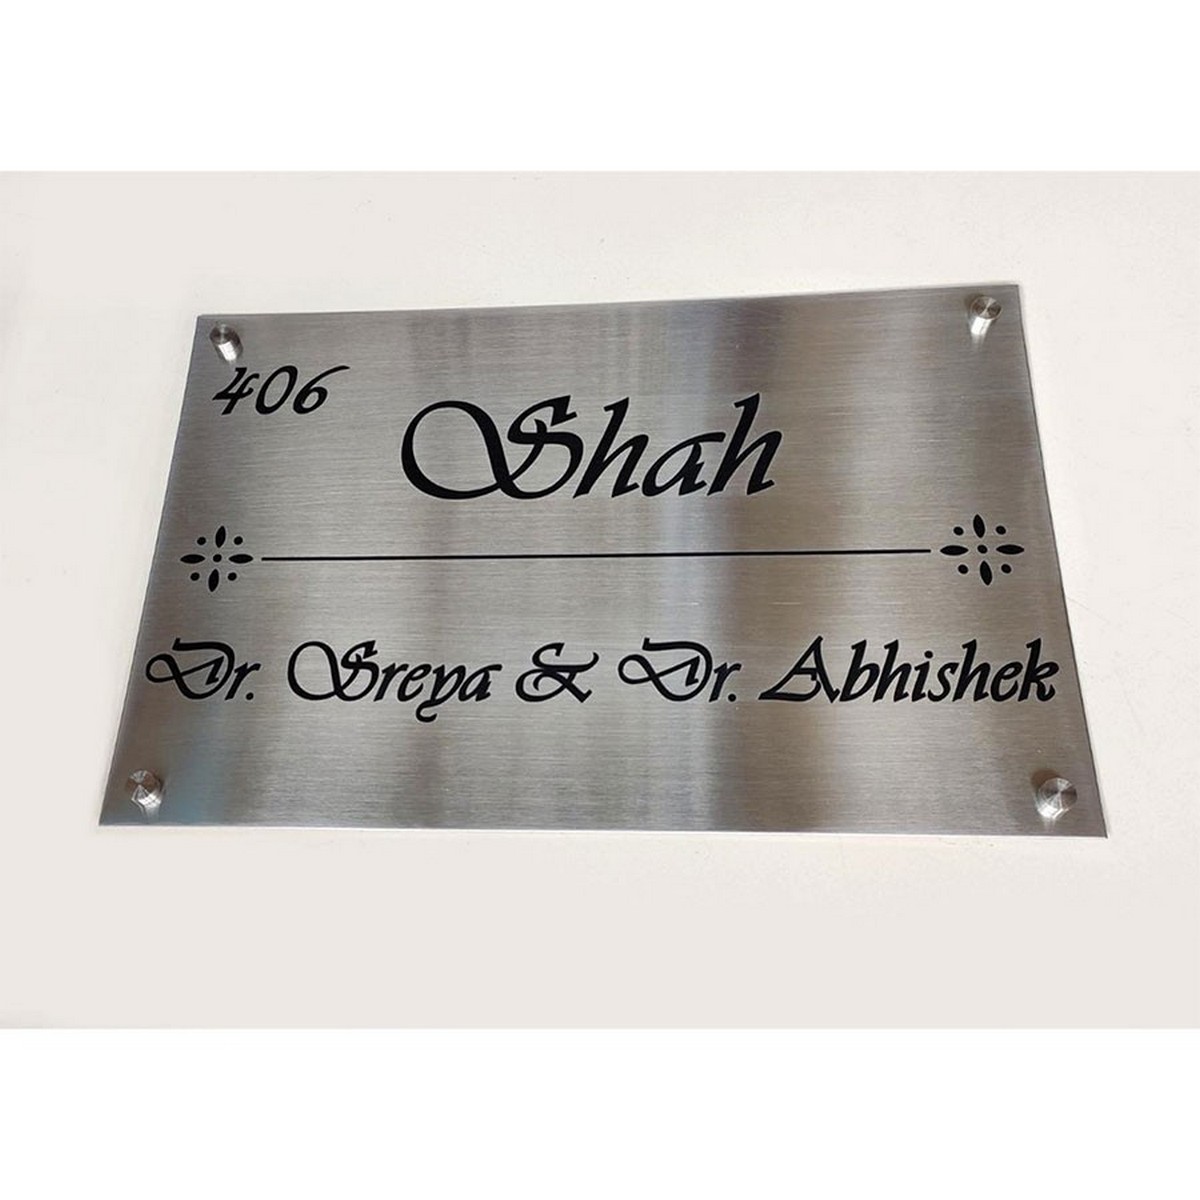 Stainless steel name plate